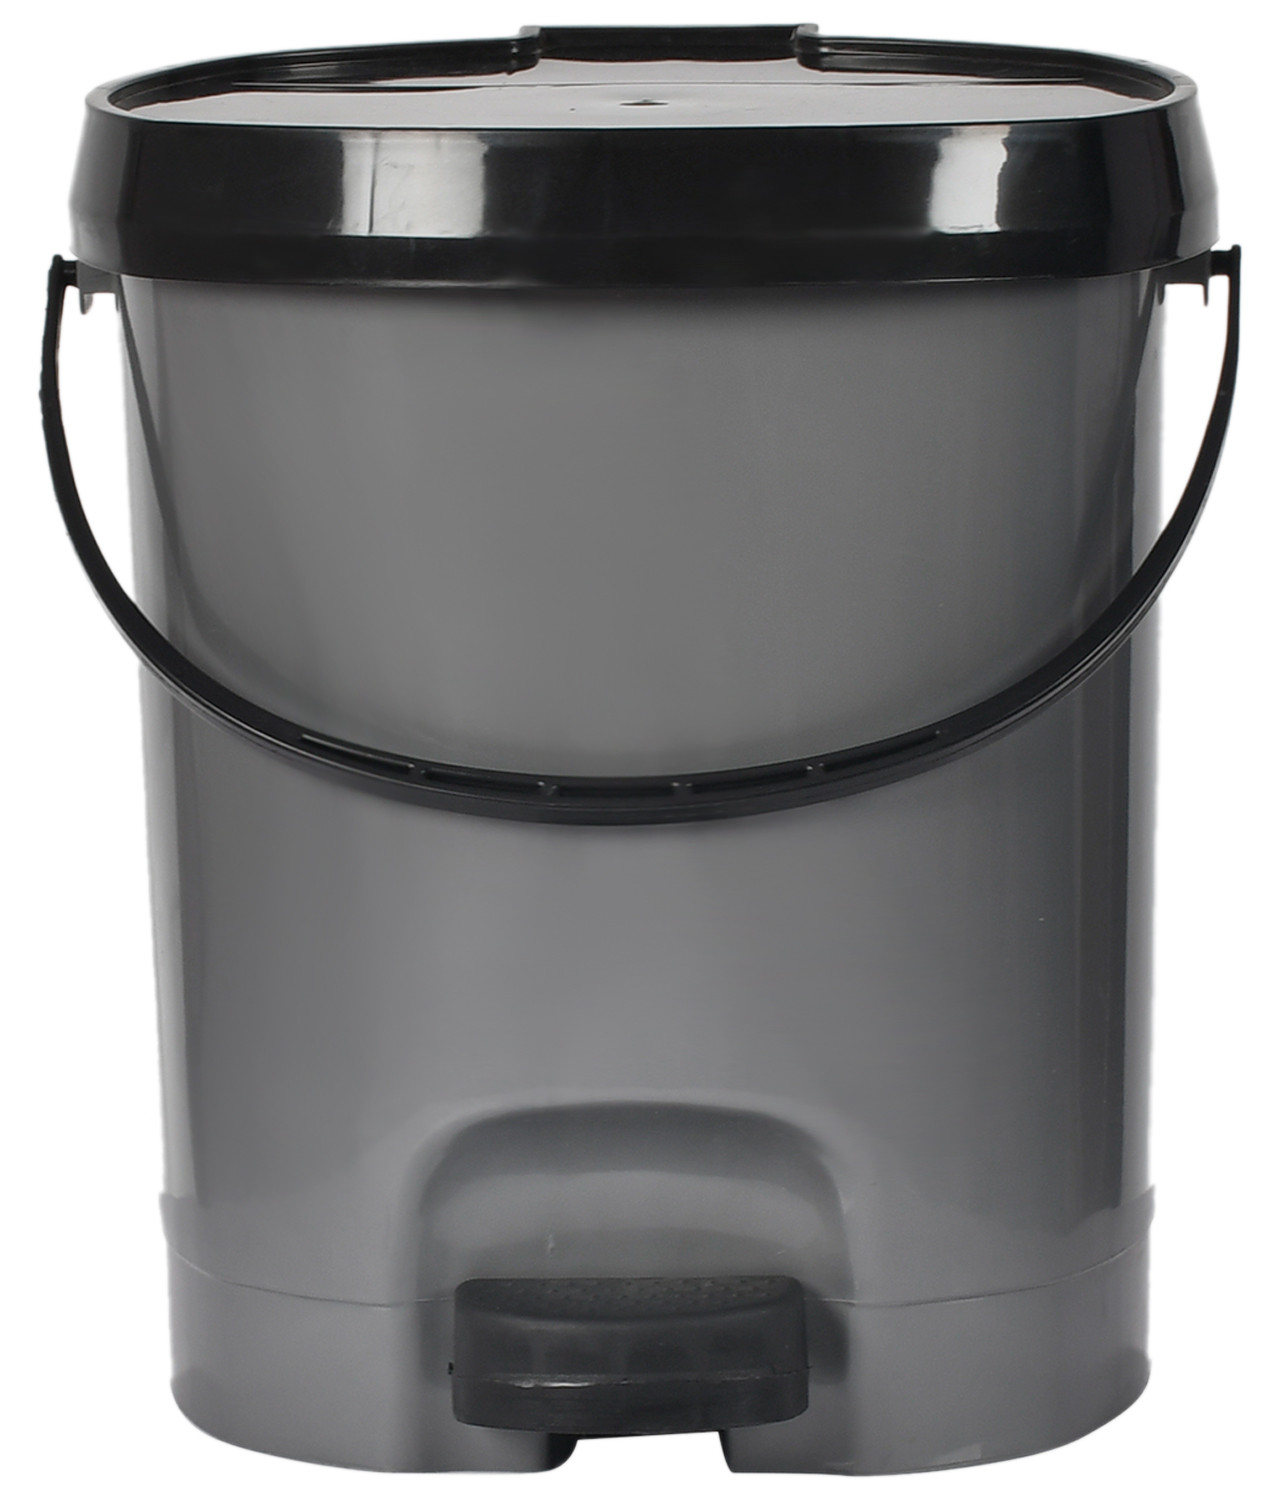 Kuber Industries Multiuses Plastic Pedal Dustbin, Waste Bin, Trash Can With Detachable Bucket, 10 Litre- Pack of 2 (Blue & Grey)-47KM0733